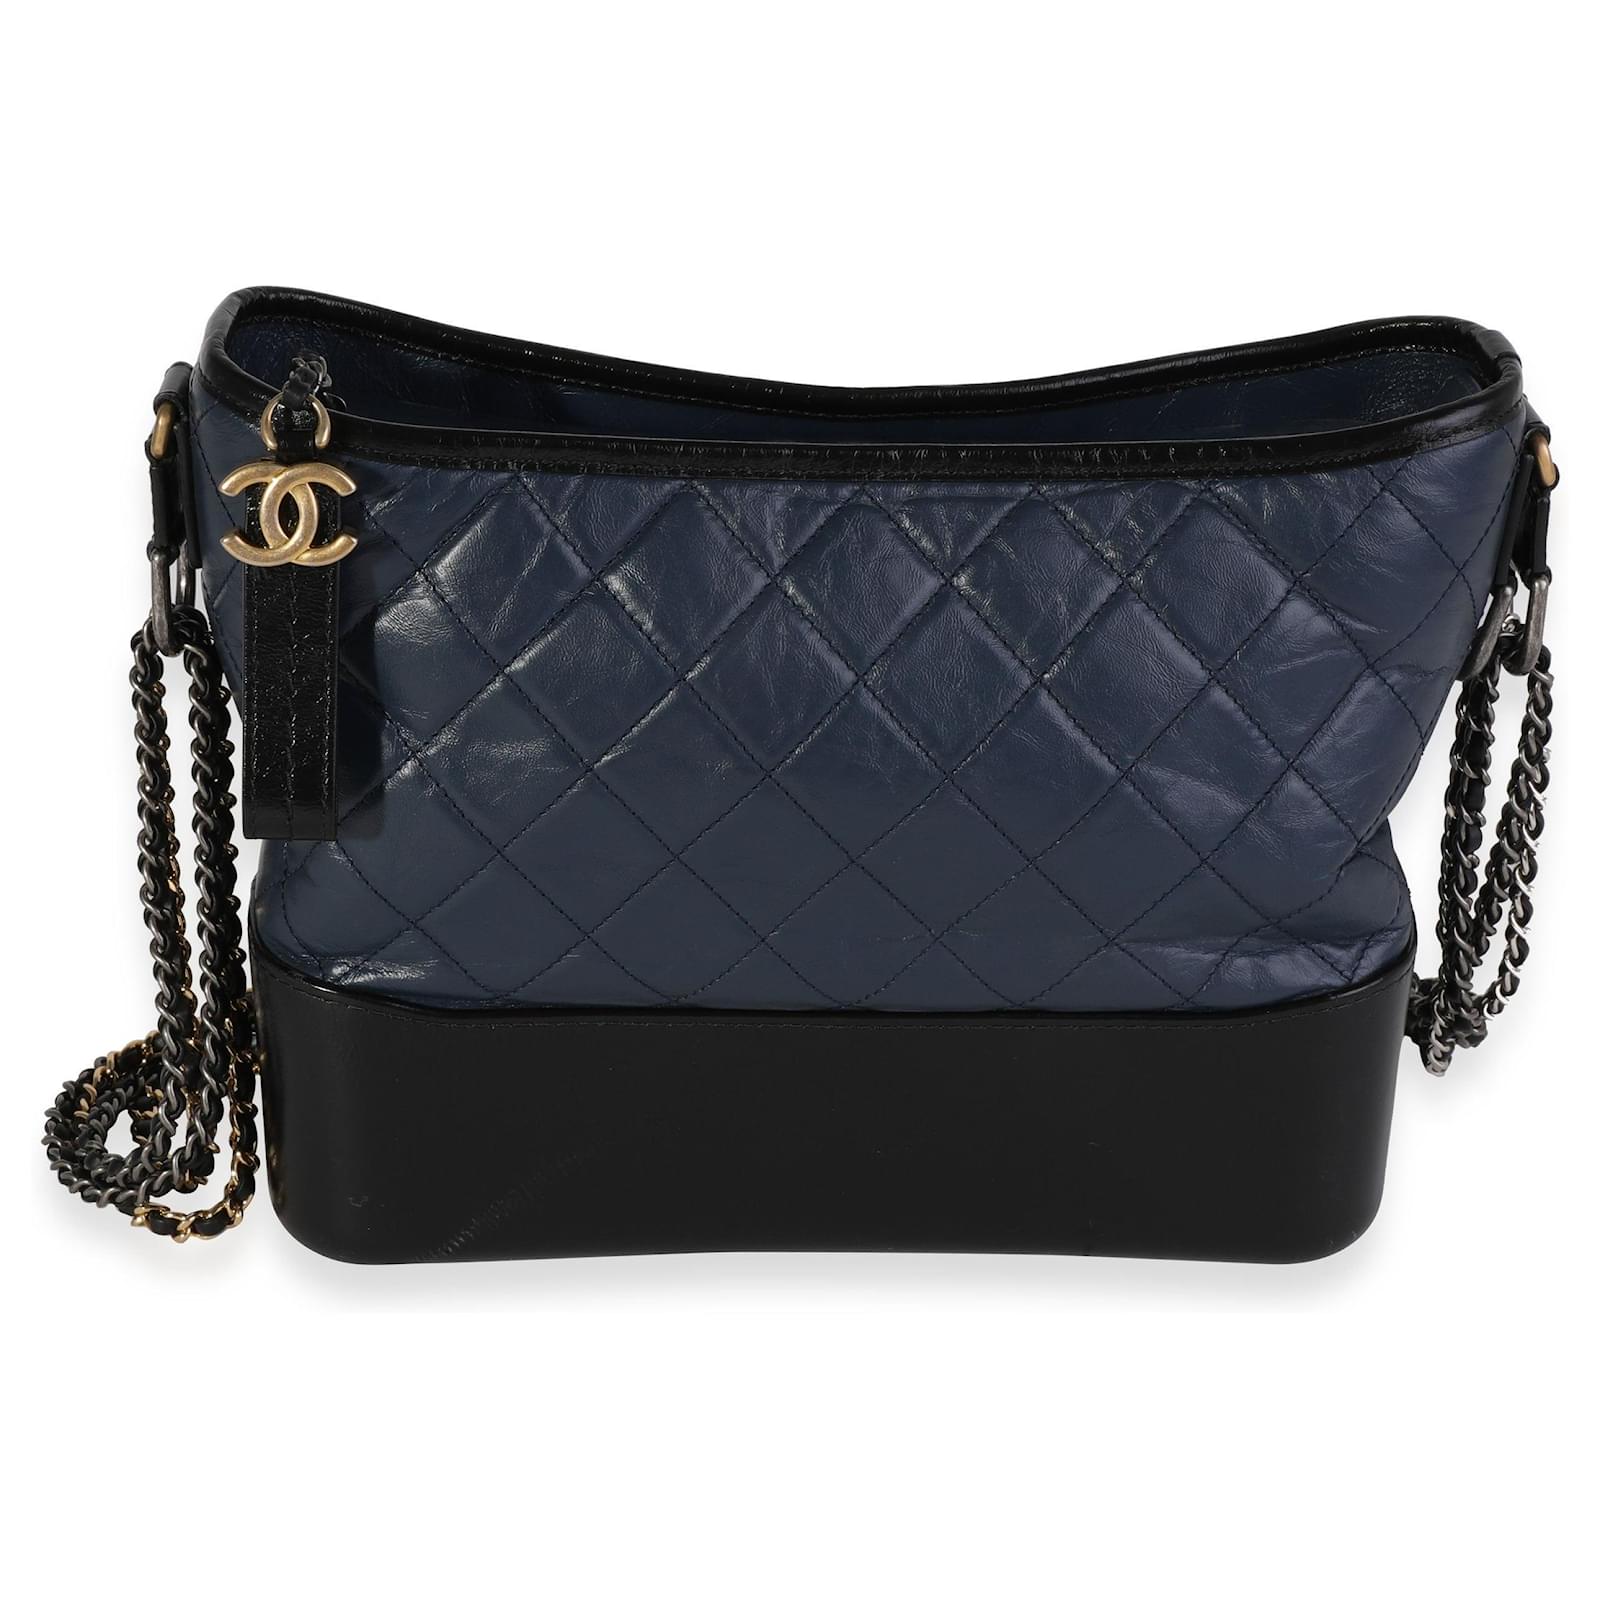 Chanel Black Quilted Medium Gabrielle Hobo